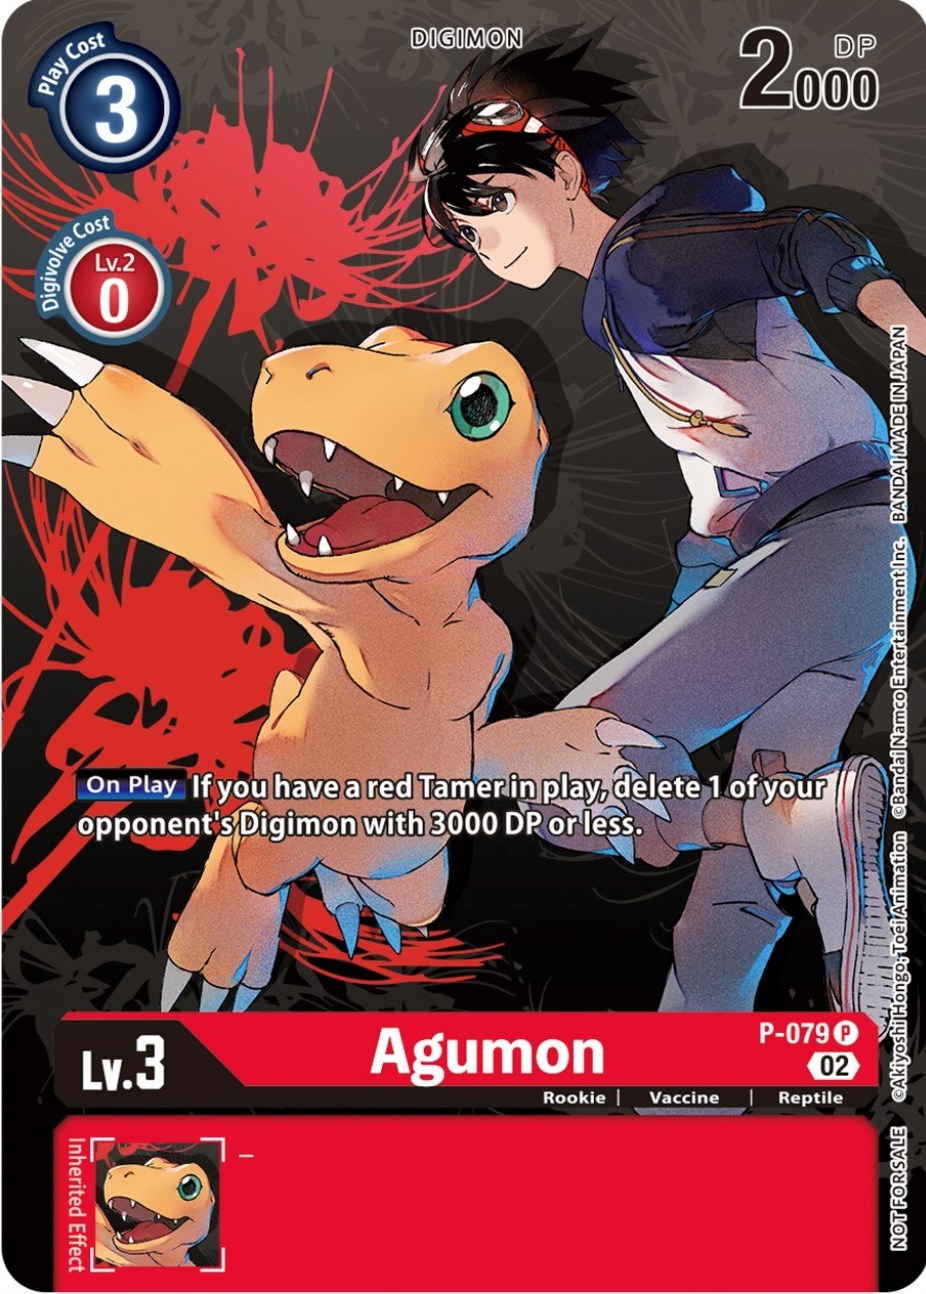 Agumon - P-079 (Tamer Party Vol.7) [P-079] [Digimon Promotion Cards] Normal